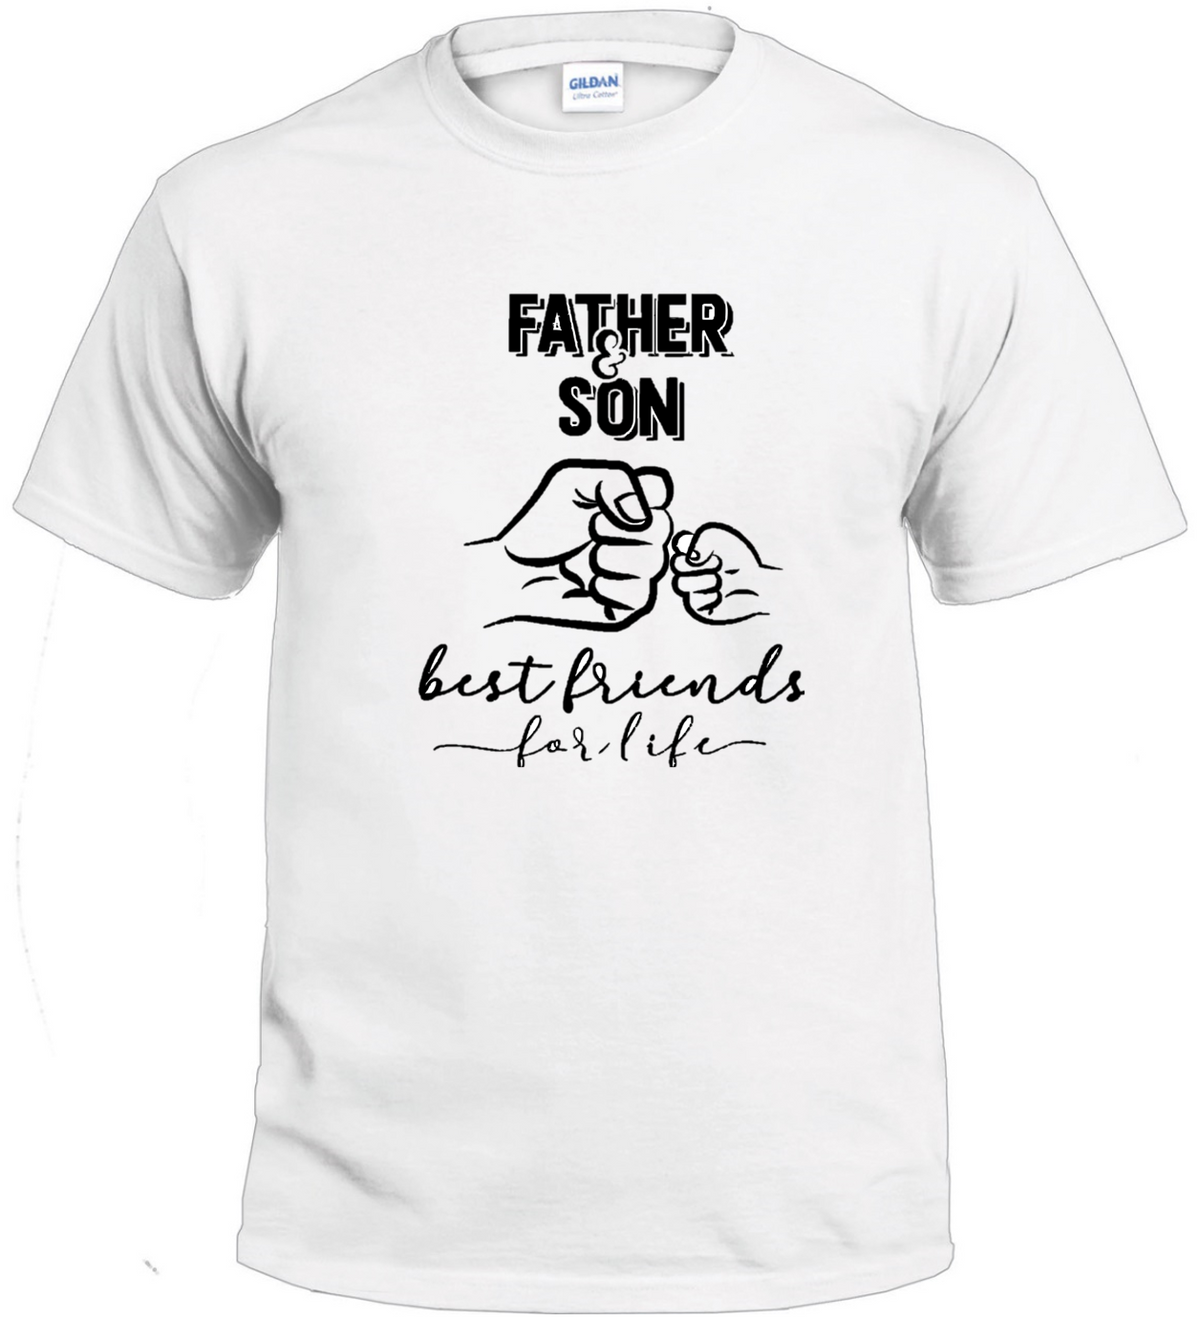 Father & Son t-shirt